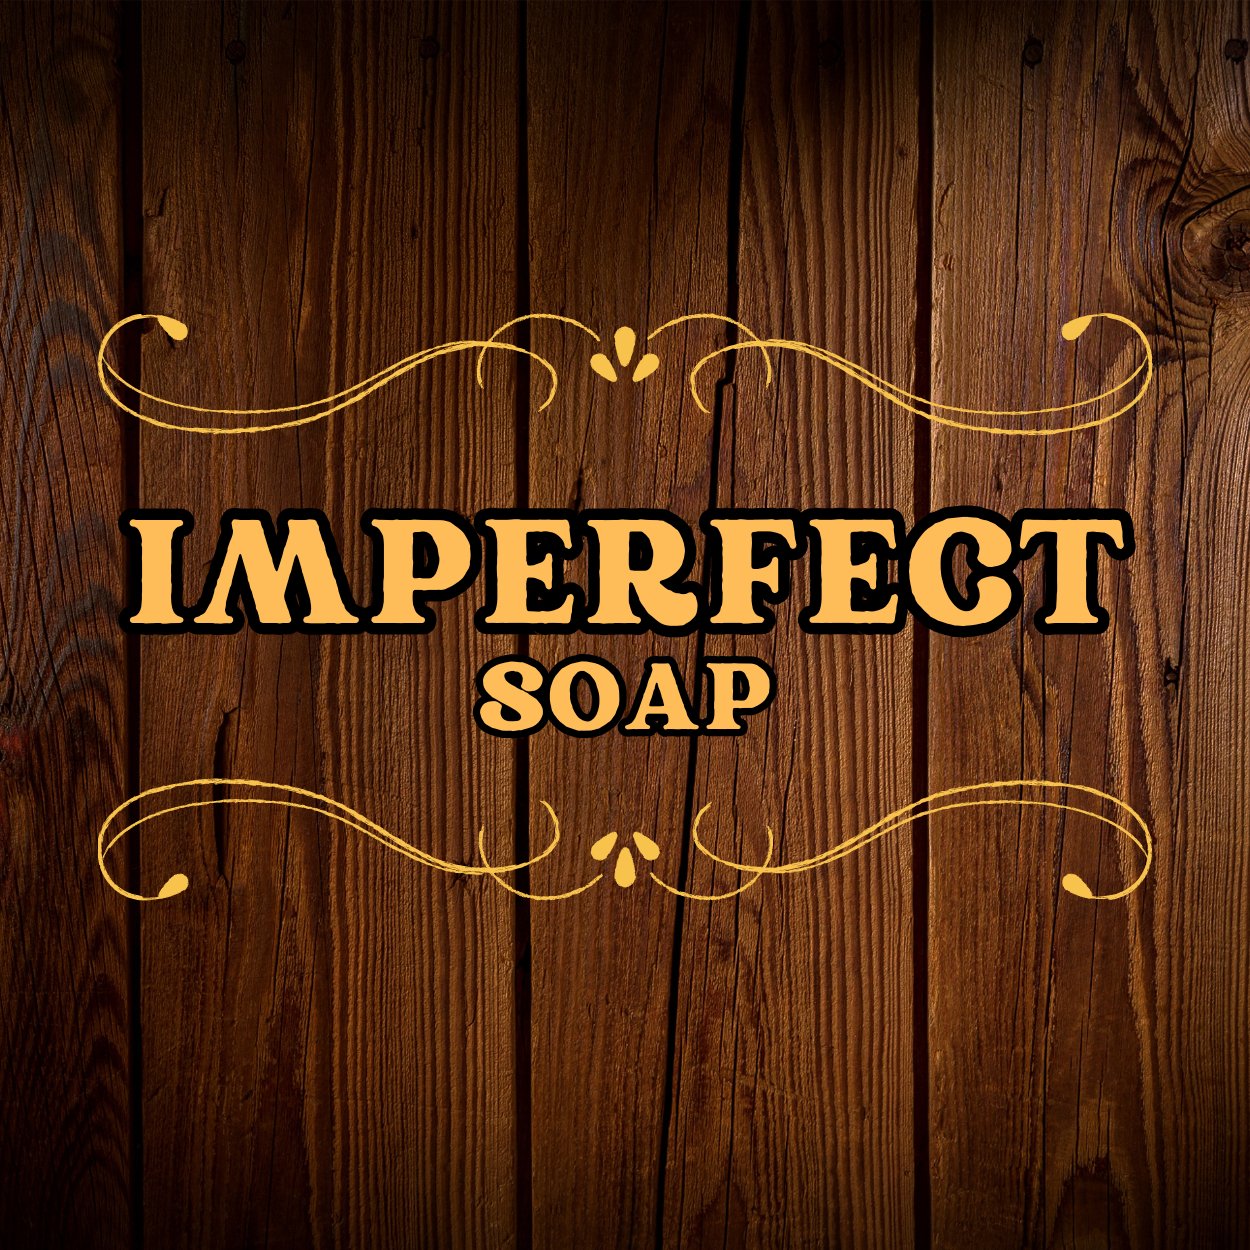 Imperfect Vanilla Musk Bar Soap - Inconsistent Coloring or Stearic Acid Spots - Grizzly Naturals Soap Company